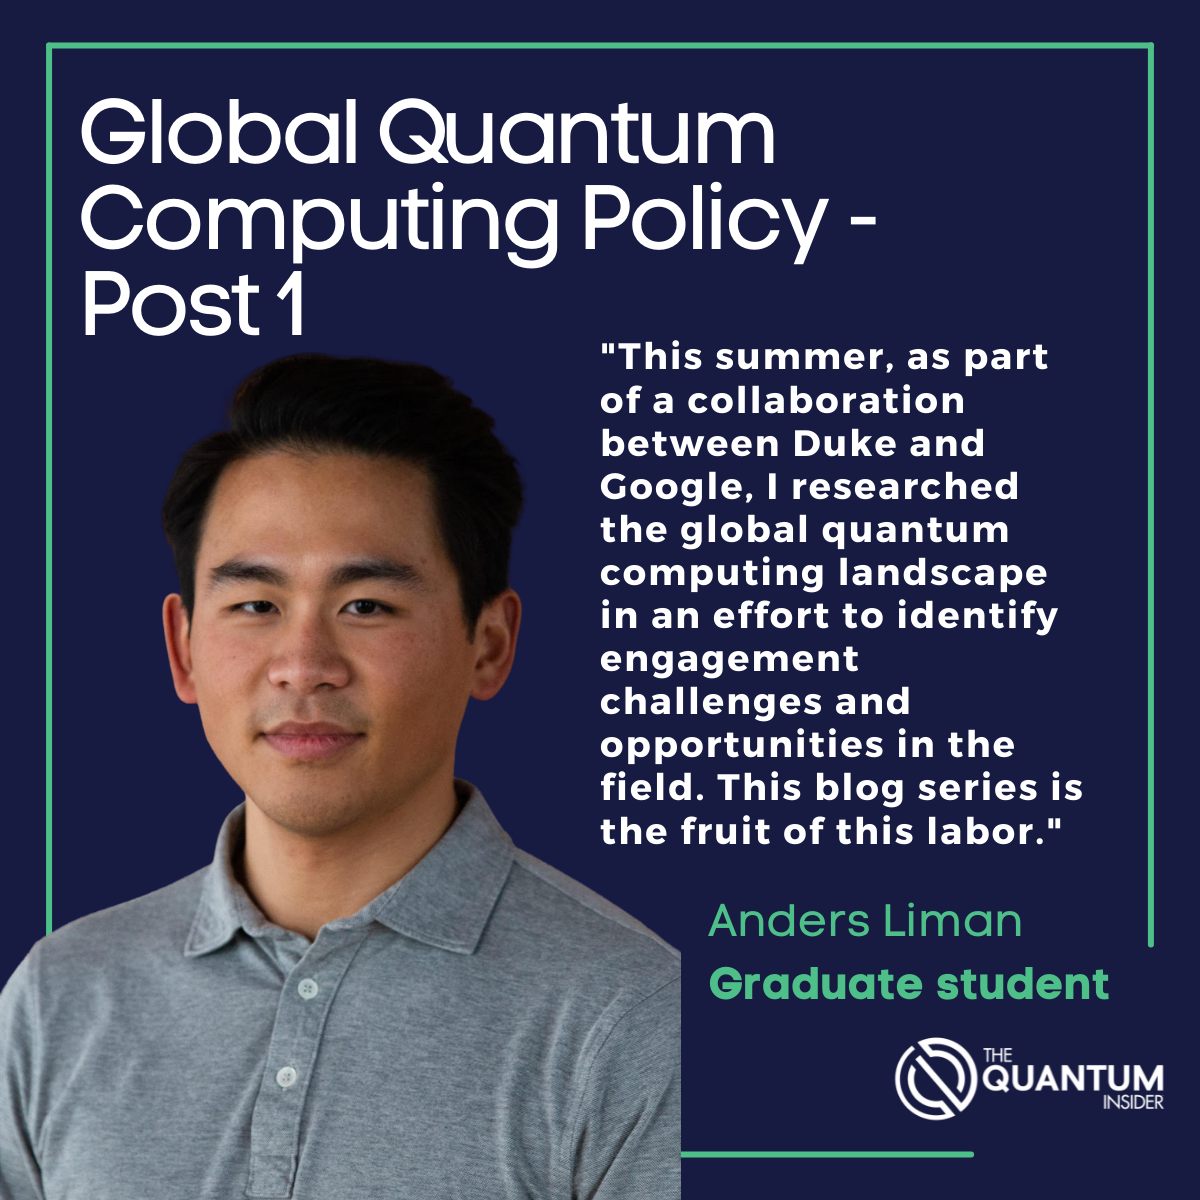 Researching the global quantum computing landscape in an effort to identify engagement challenges and opportunities in the field: Global Quantum...